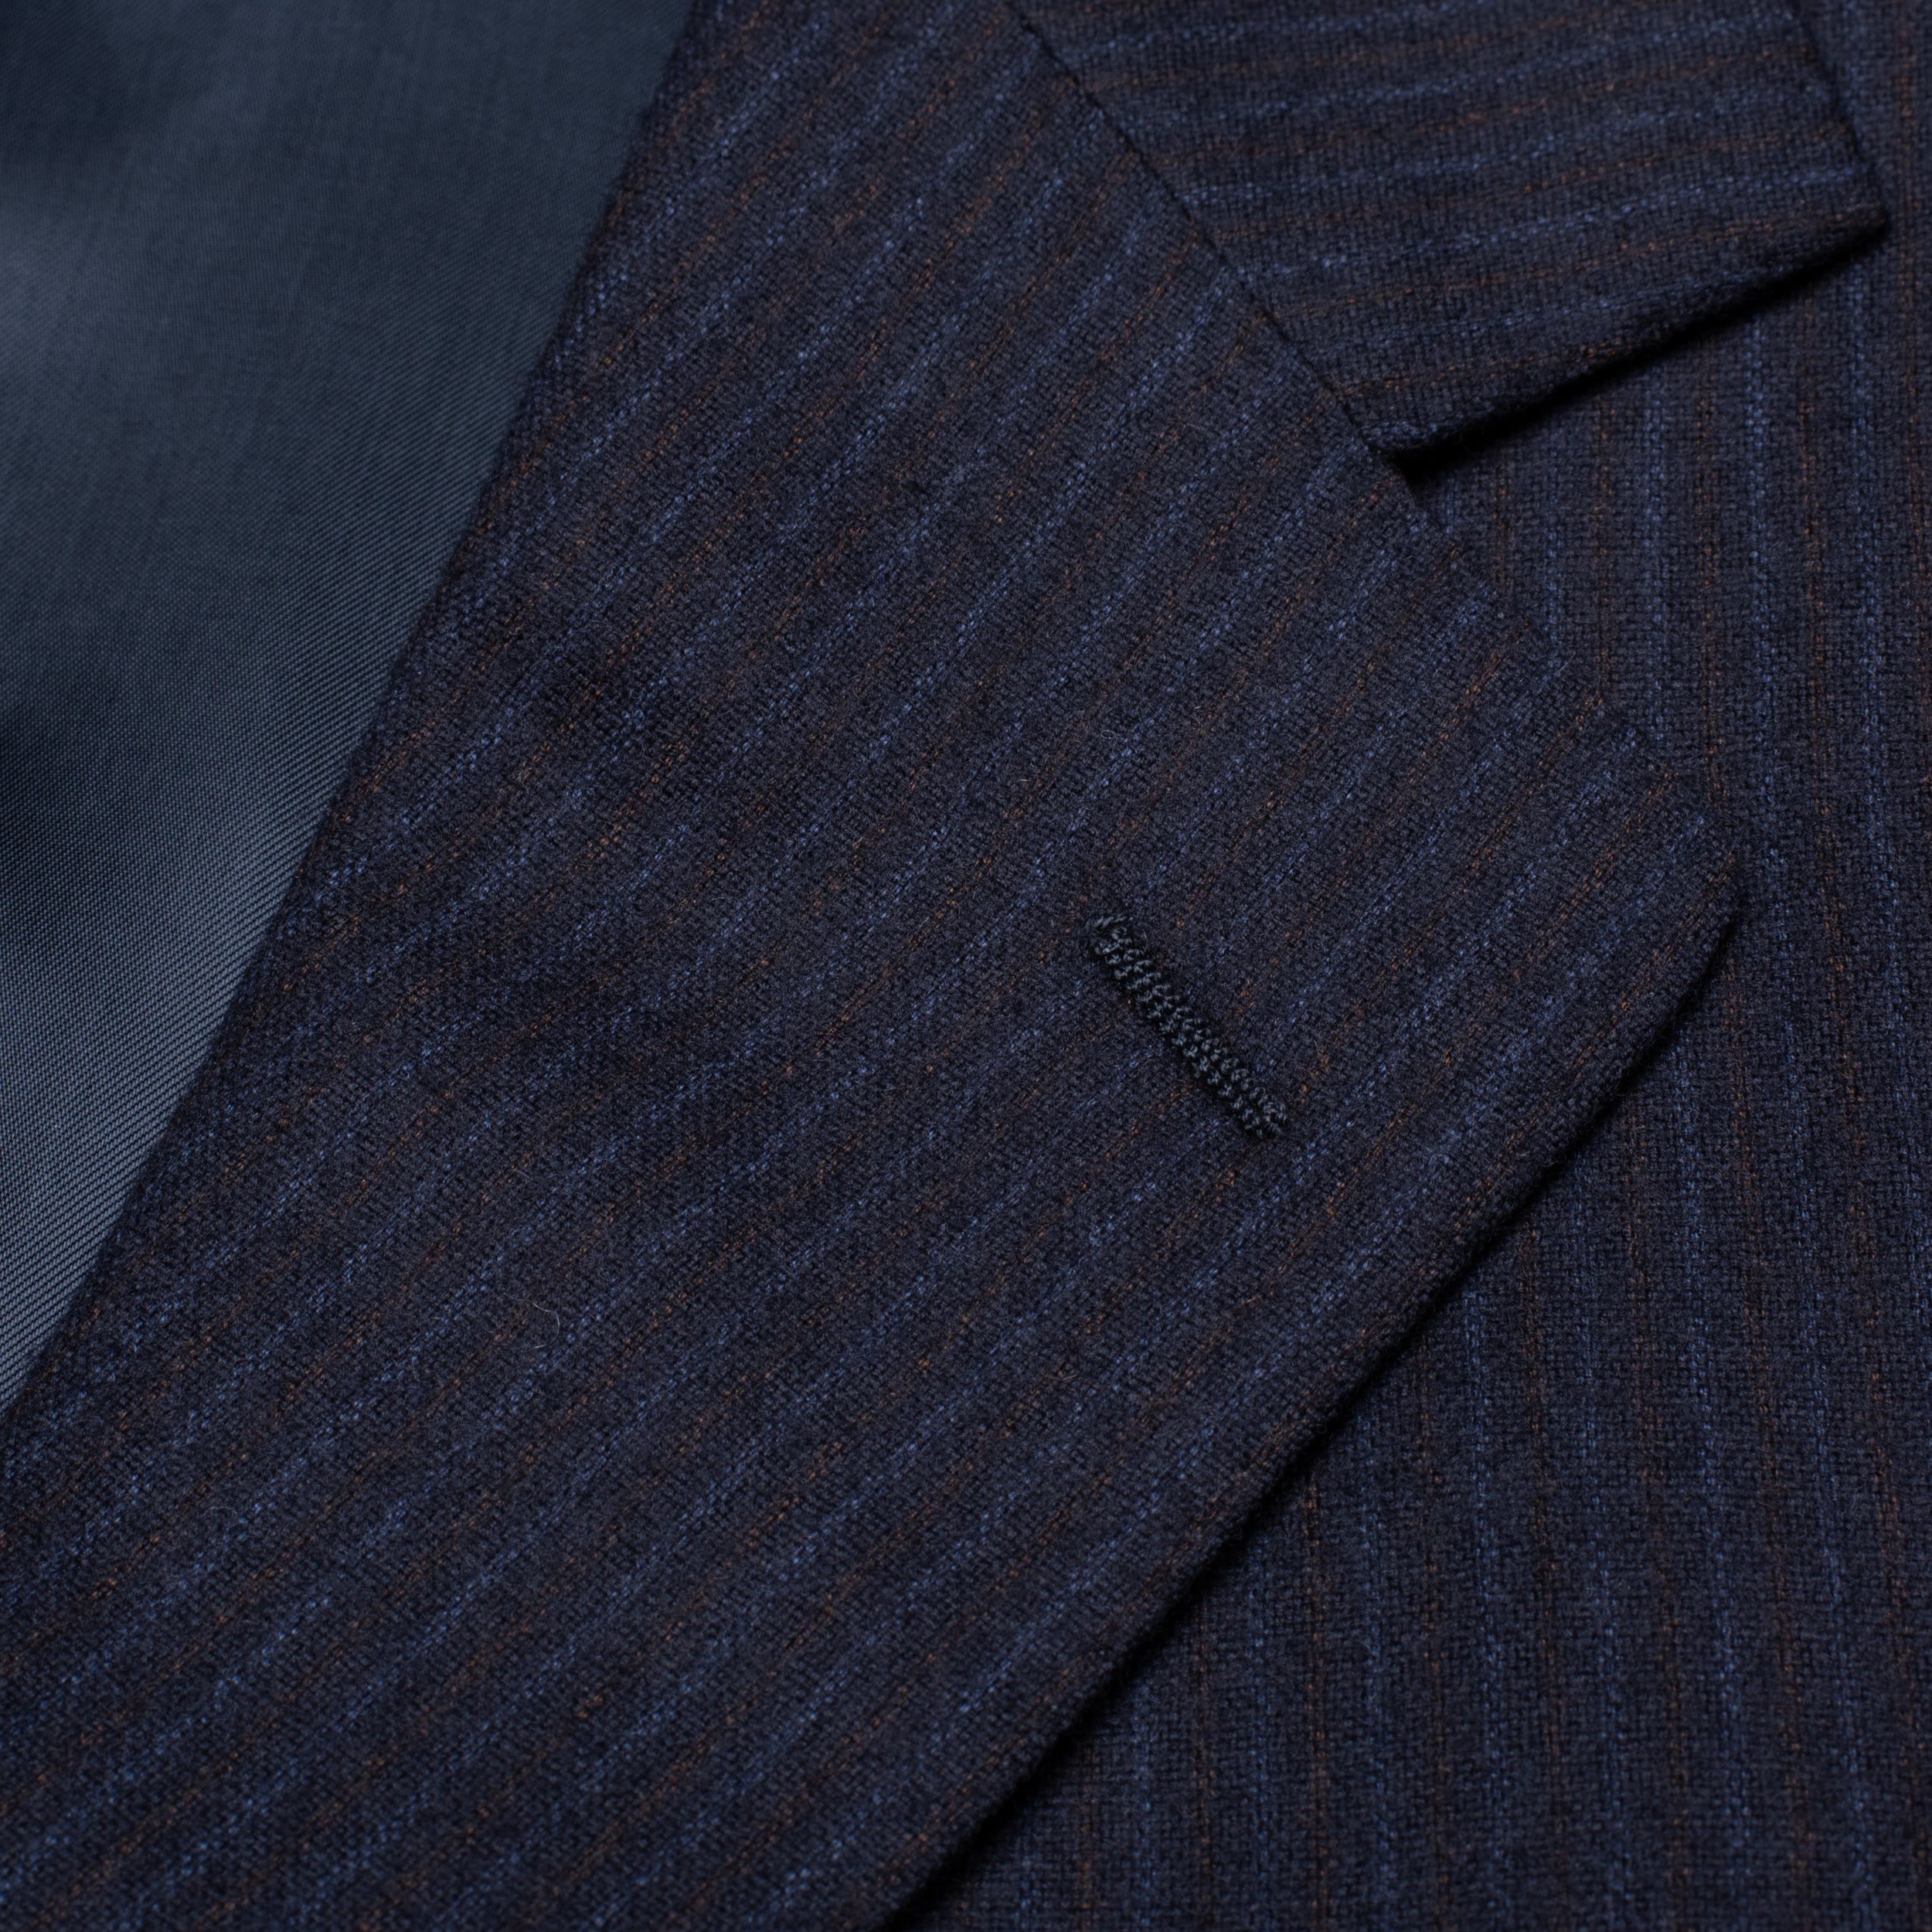 CASTANGIA 1850 Navy Blue Striped Wool Flannel Suit EU 50 NEW US 40 CASTANGIA